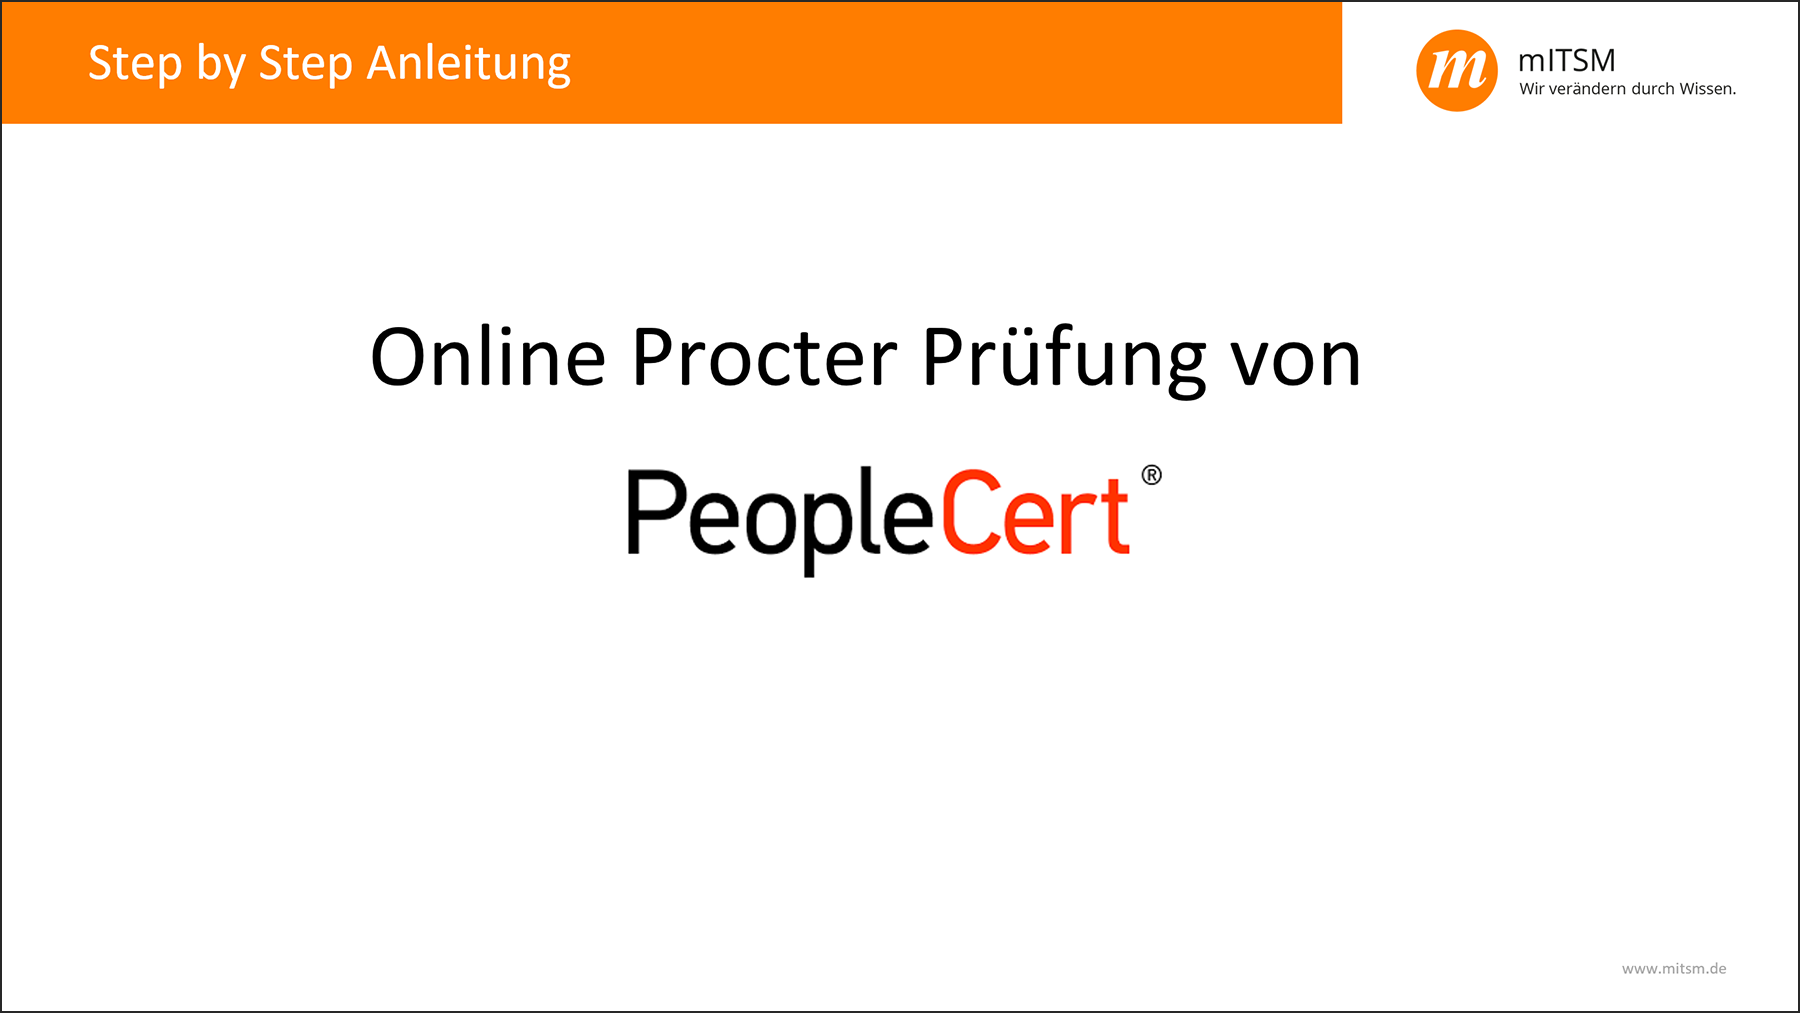 Step-by-Step Anleitung PeopleCert Online Prüfung